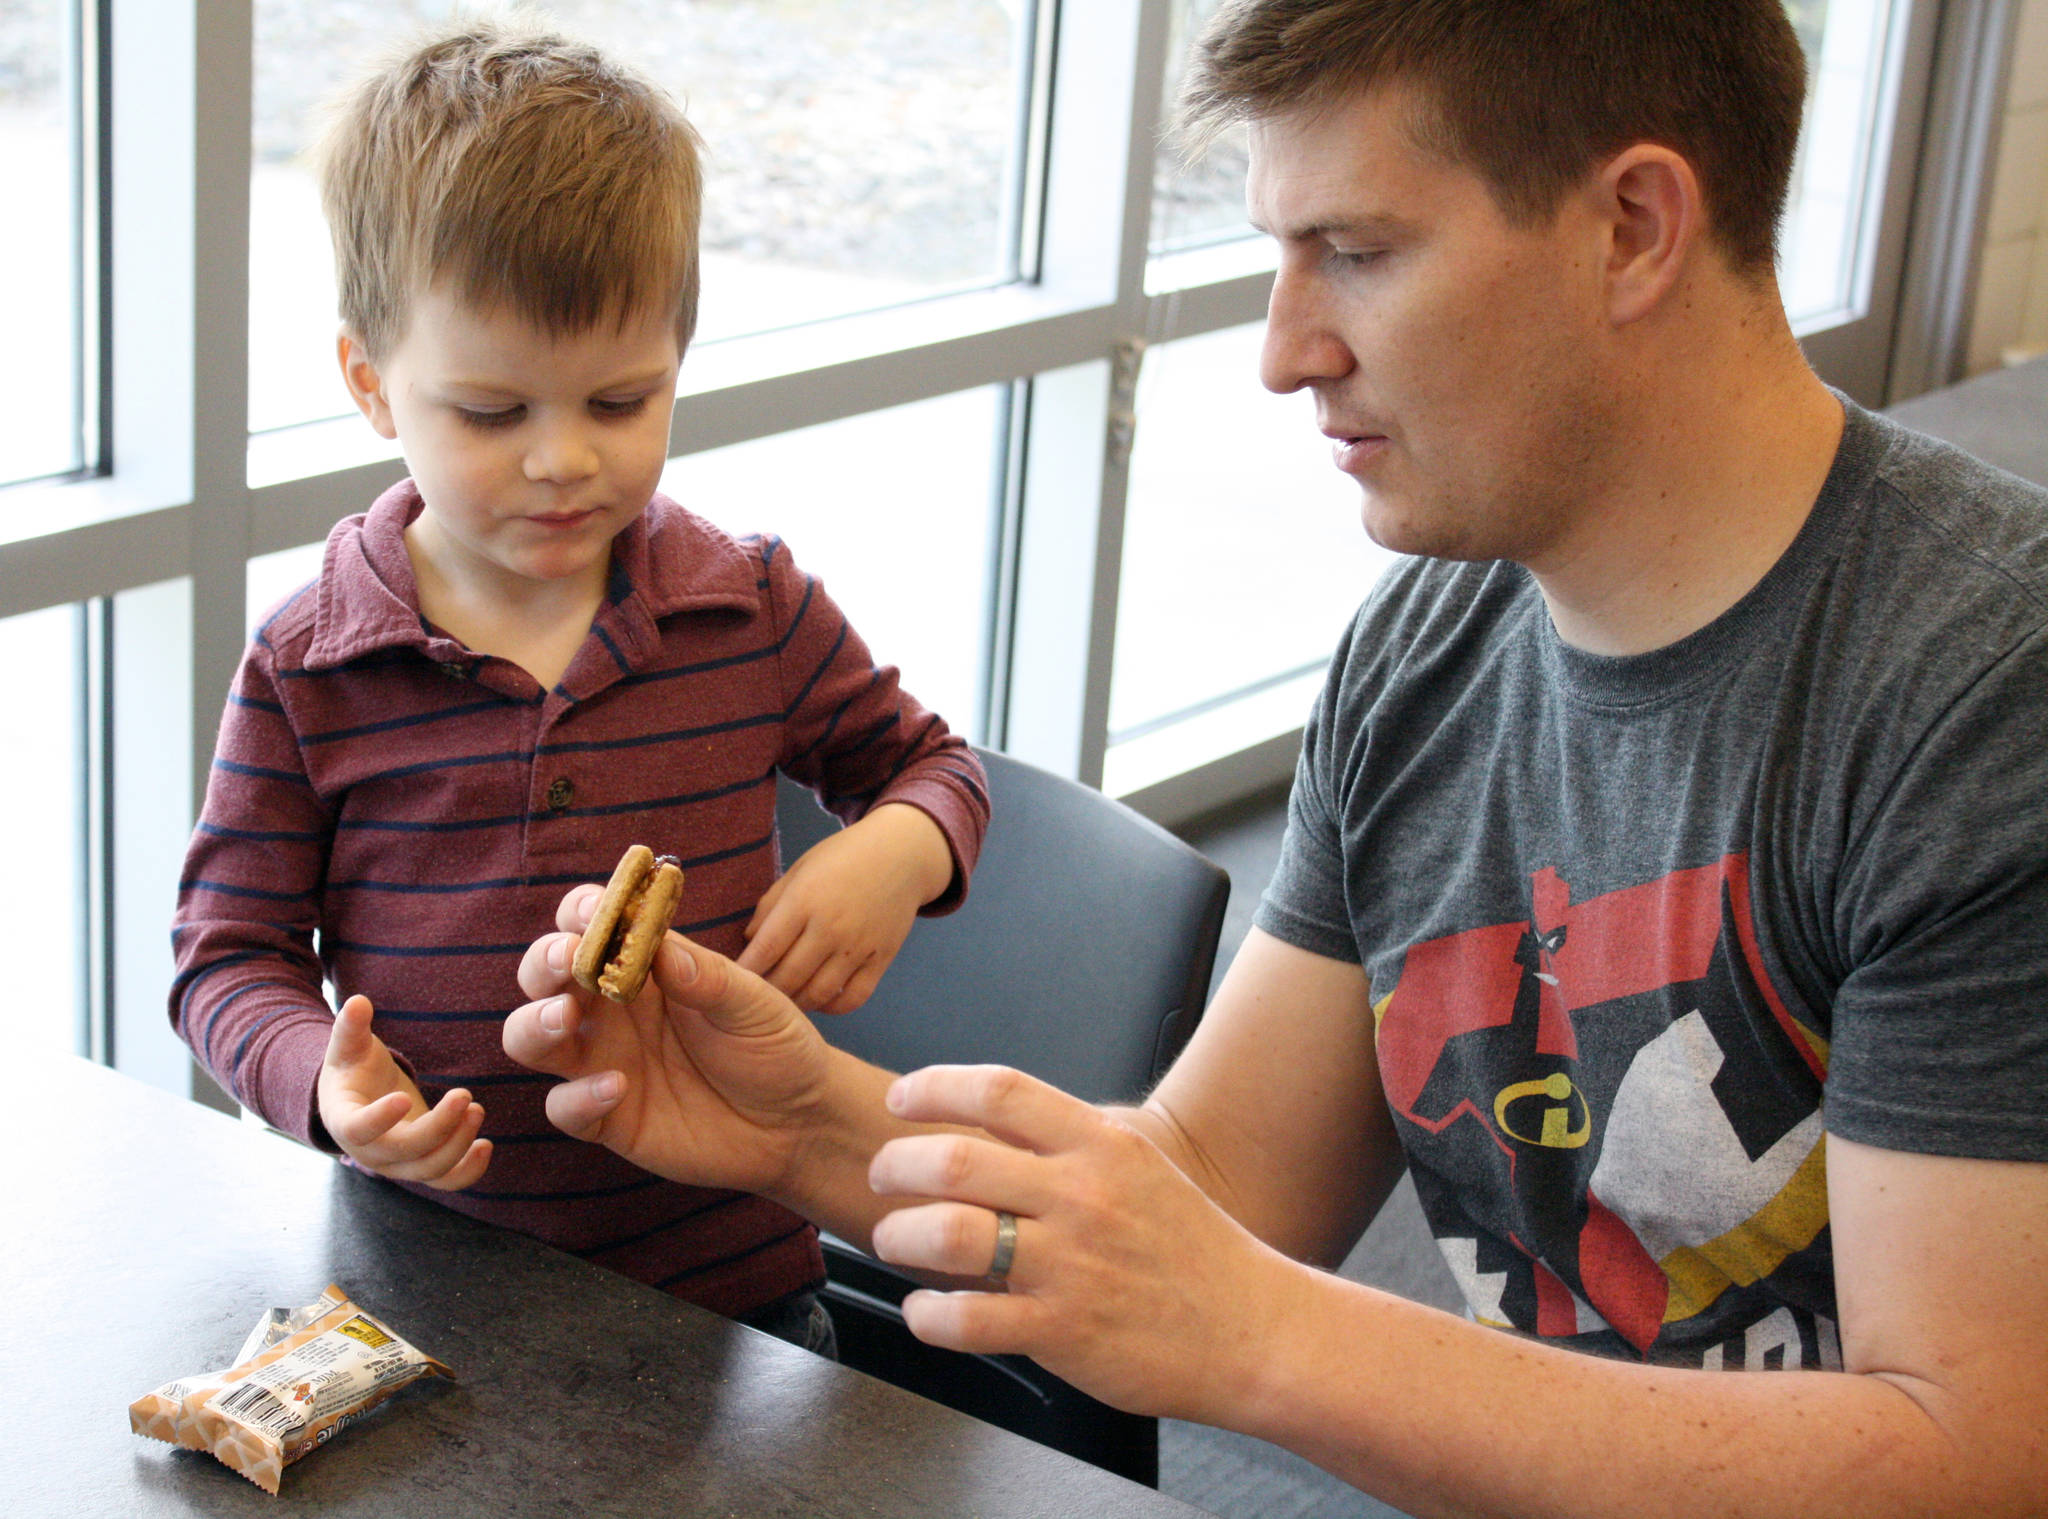 Kyle Downum hands his son a graham cracker sandwich at the Kenai Community Library on Monday. The family took a break from the library’s many activists to enjoy a free afternoon lunch. The Kenai and Soldotna libraries are offering free lunches to children 18 and under as part of its Summer Food Program. (Photo by Erin Thompson/Peninsula Clarion)